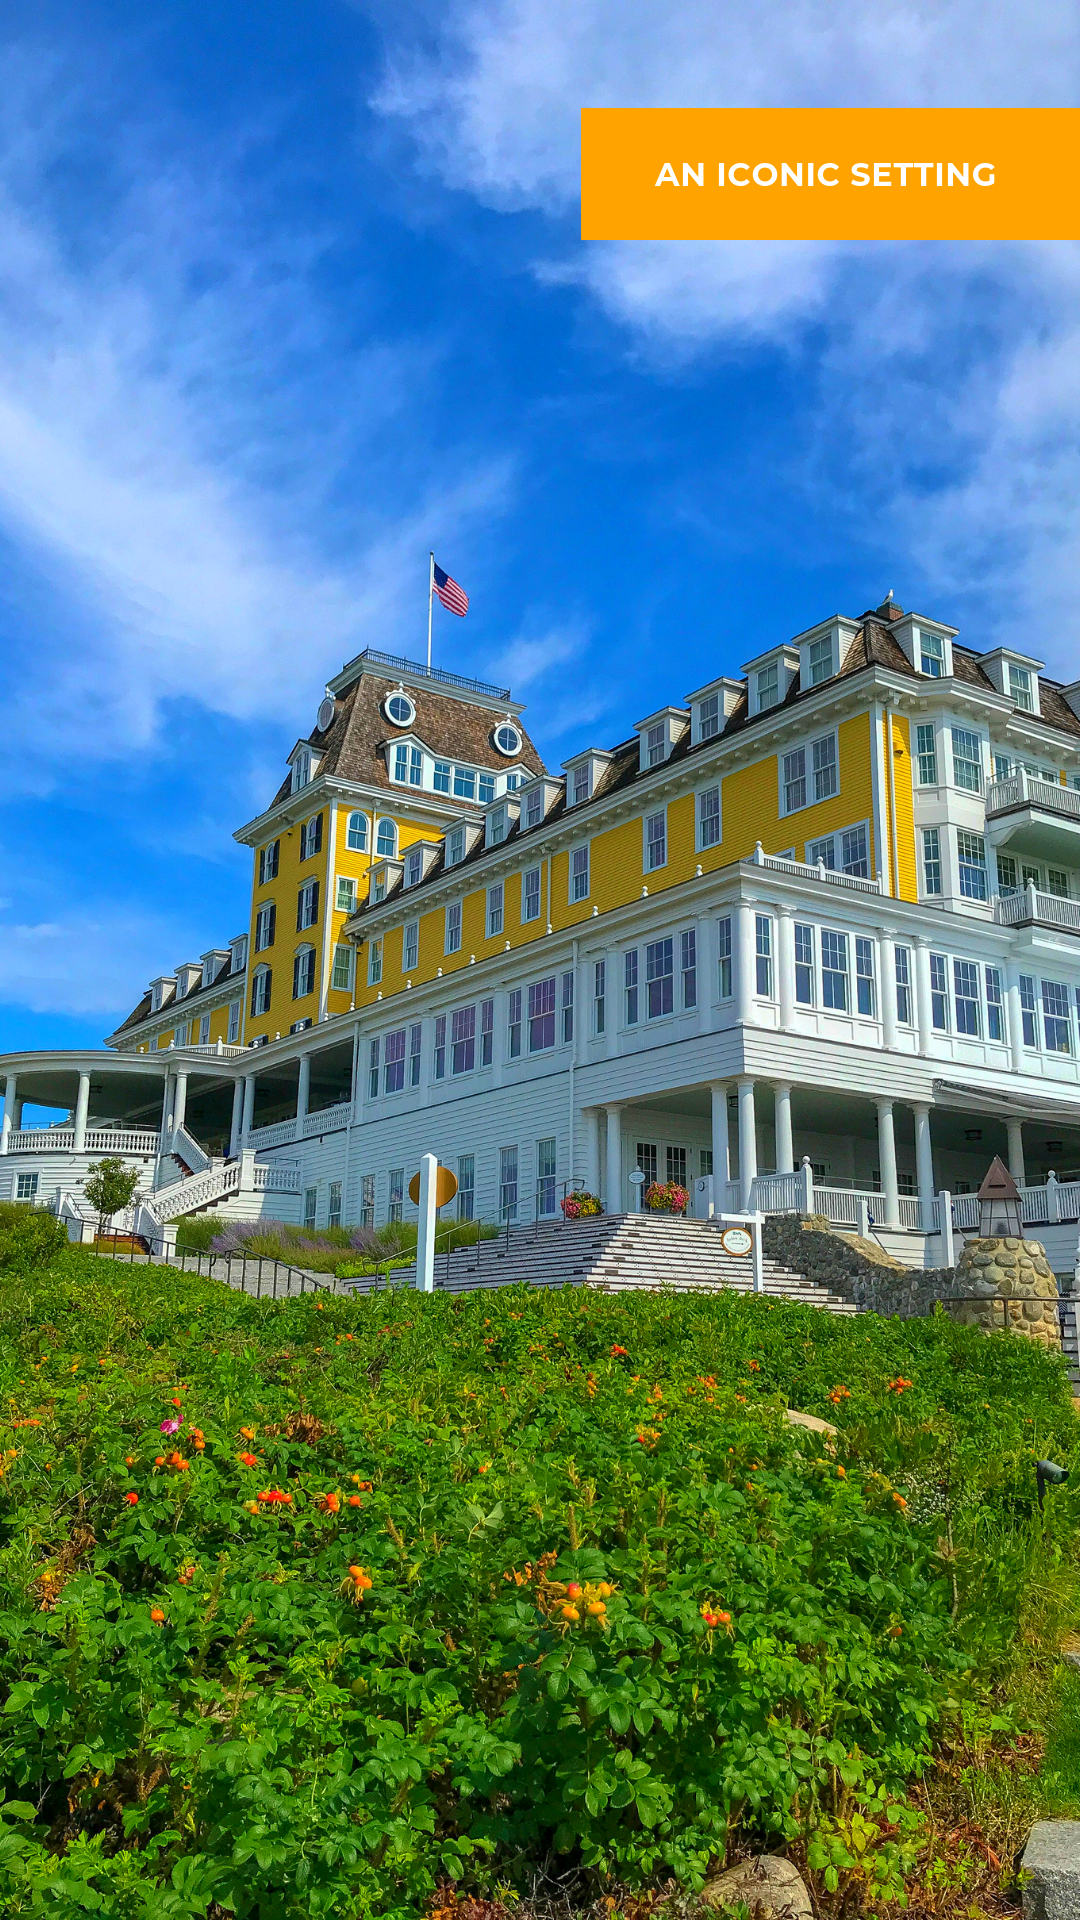 Ocean House in Watch Hill Rhode Island is a luxurious Relais and Chateaux property with stunning water views and landscape